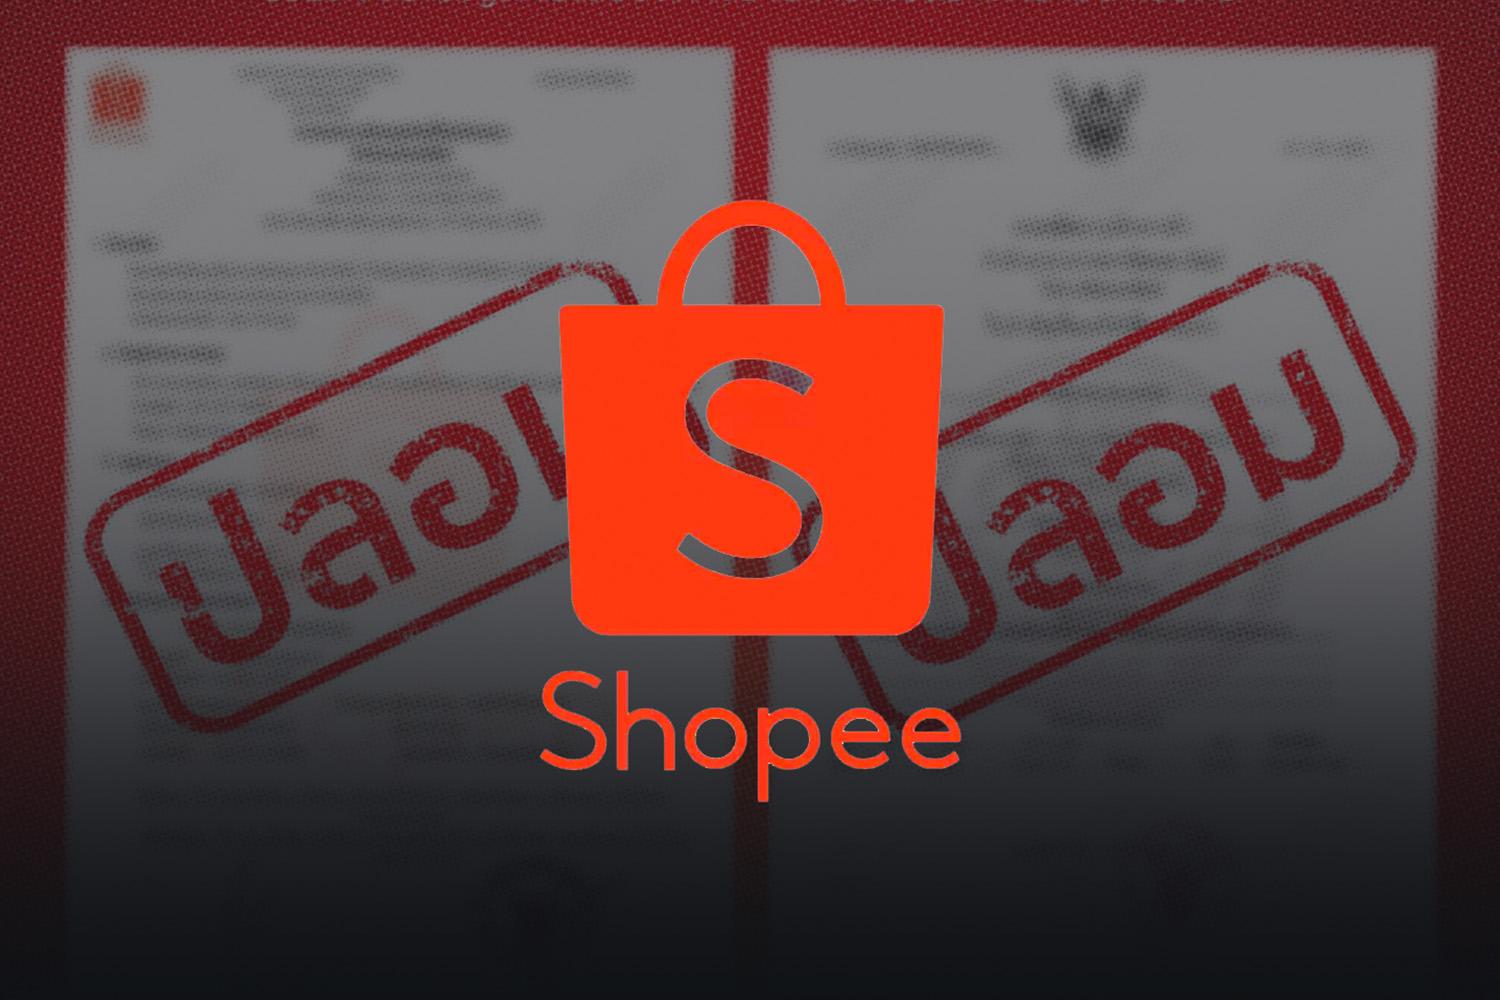 Shoppee-online-scammers-forge-company-logo-sms-call-center-SPACEBAR-Hero